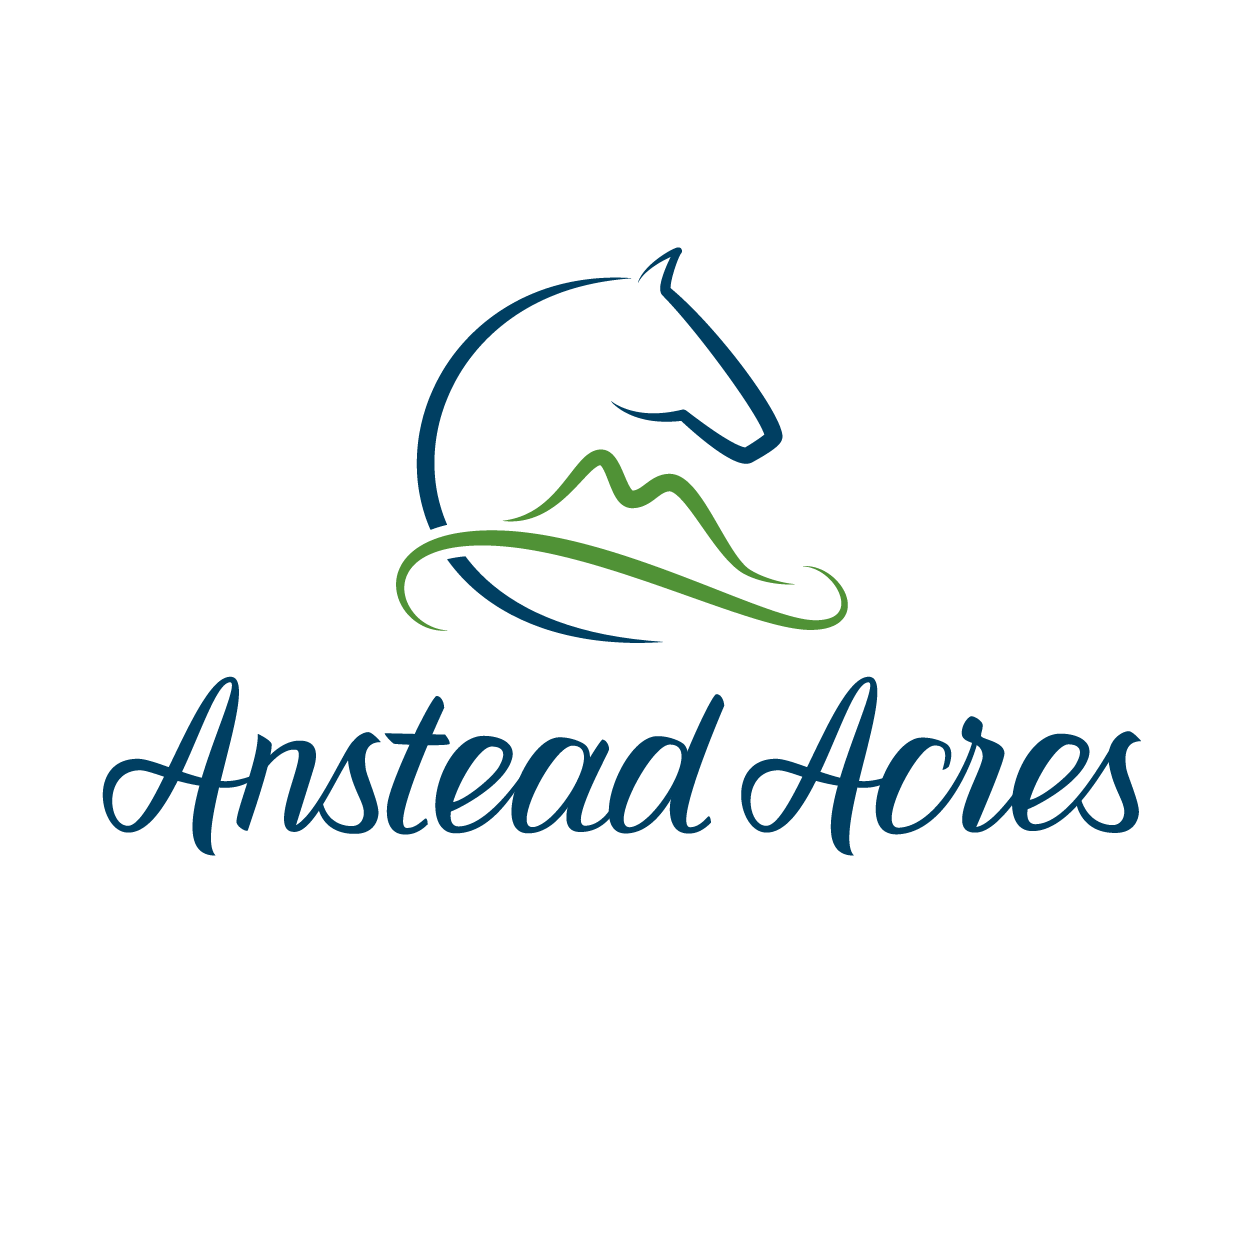 Anstead Acres custom drawn logotype and graphic